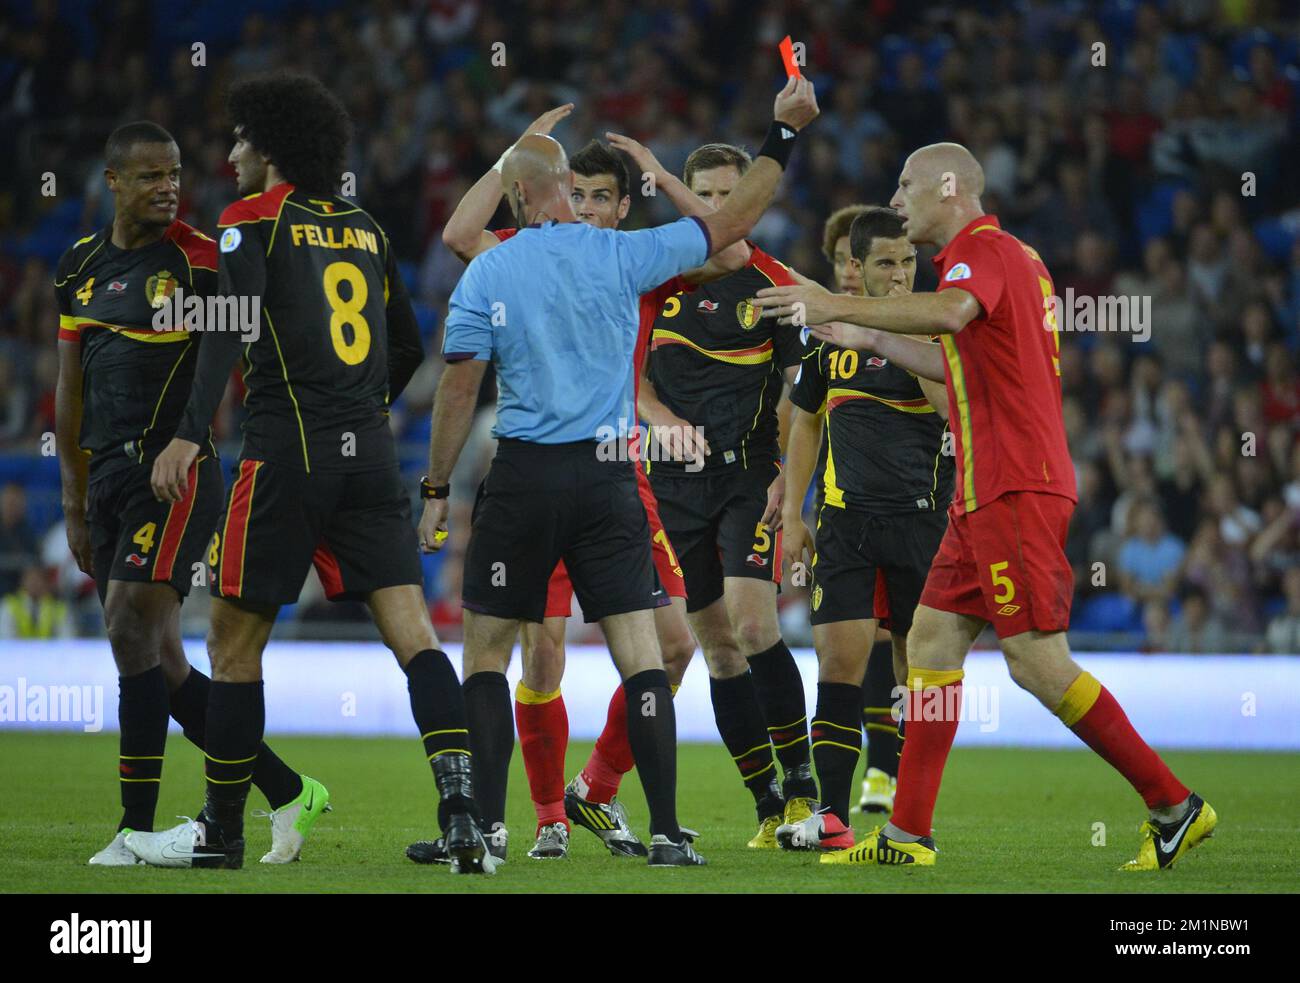 20120907 - CARDIFF, UNITED KINGDOM: Referee Stefan Johannensson gives a red card to Wales' James Collins for a severe tackle on Belgium's Guillaume Gillet during the qualifying match between Belgium Red Devils and Wales, in Cardiff, Wales, Friday 07 September 2012. This is the first of the ten qualifying games for the 2014 Soccer World Championships. BELGA PHOTO DIRK WAEM Stock Photo